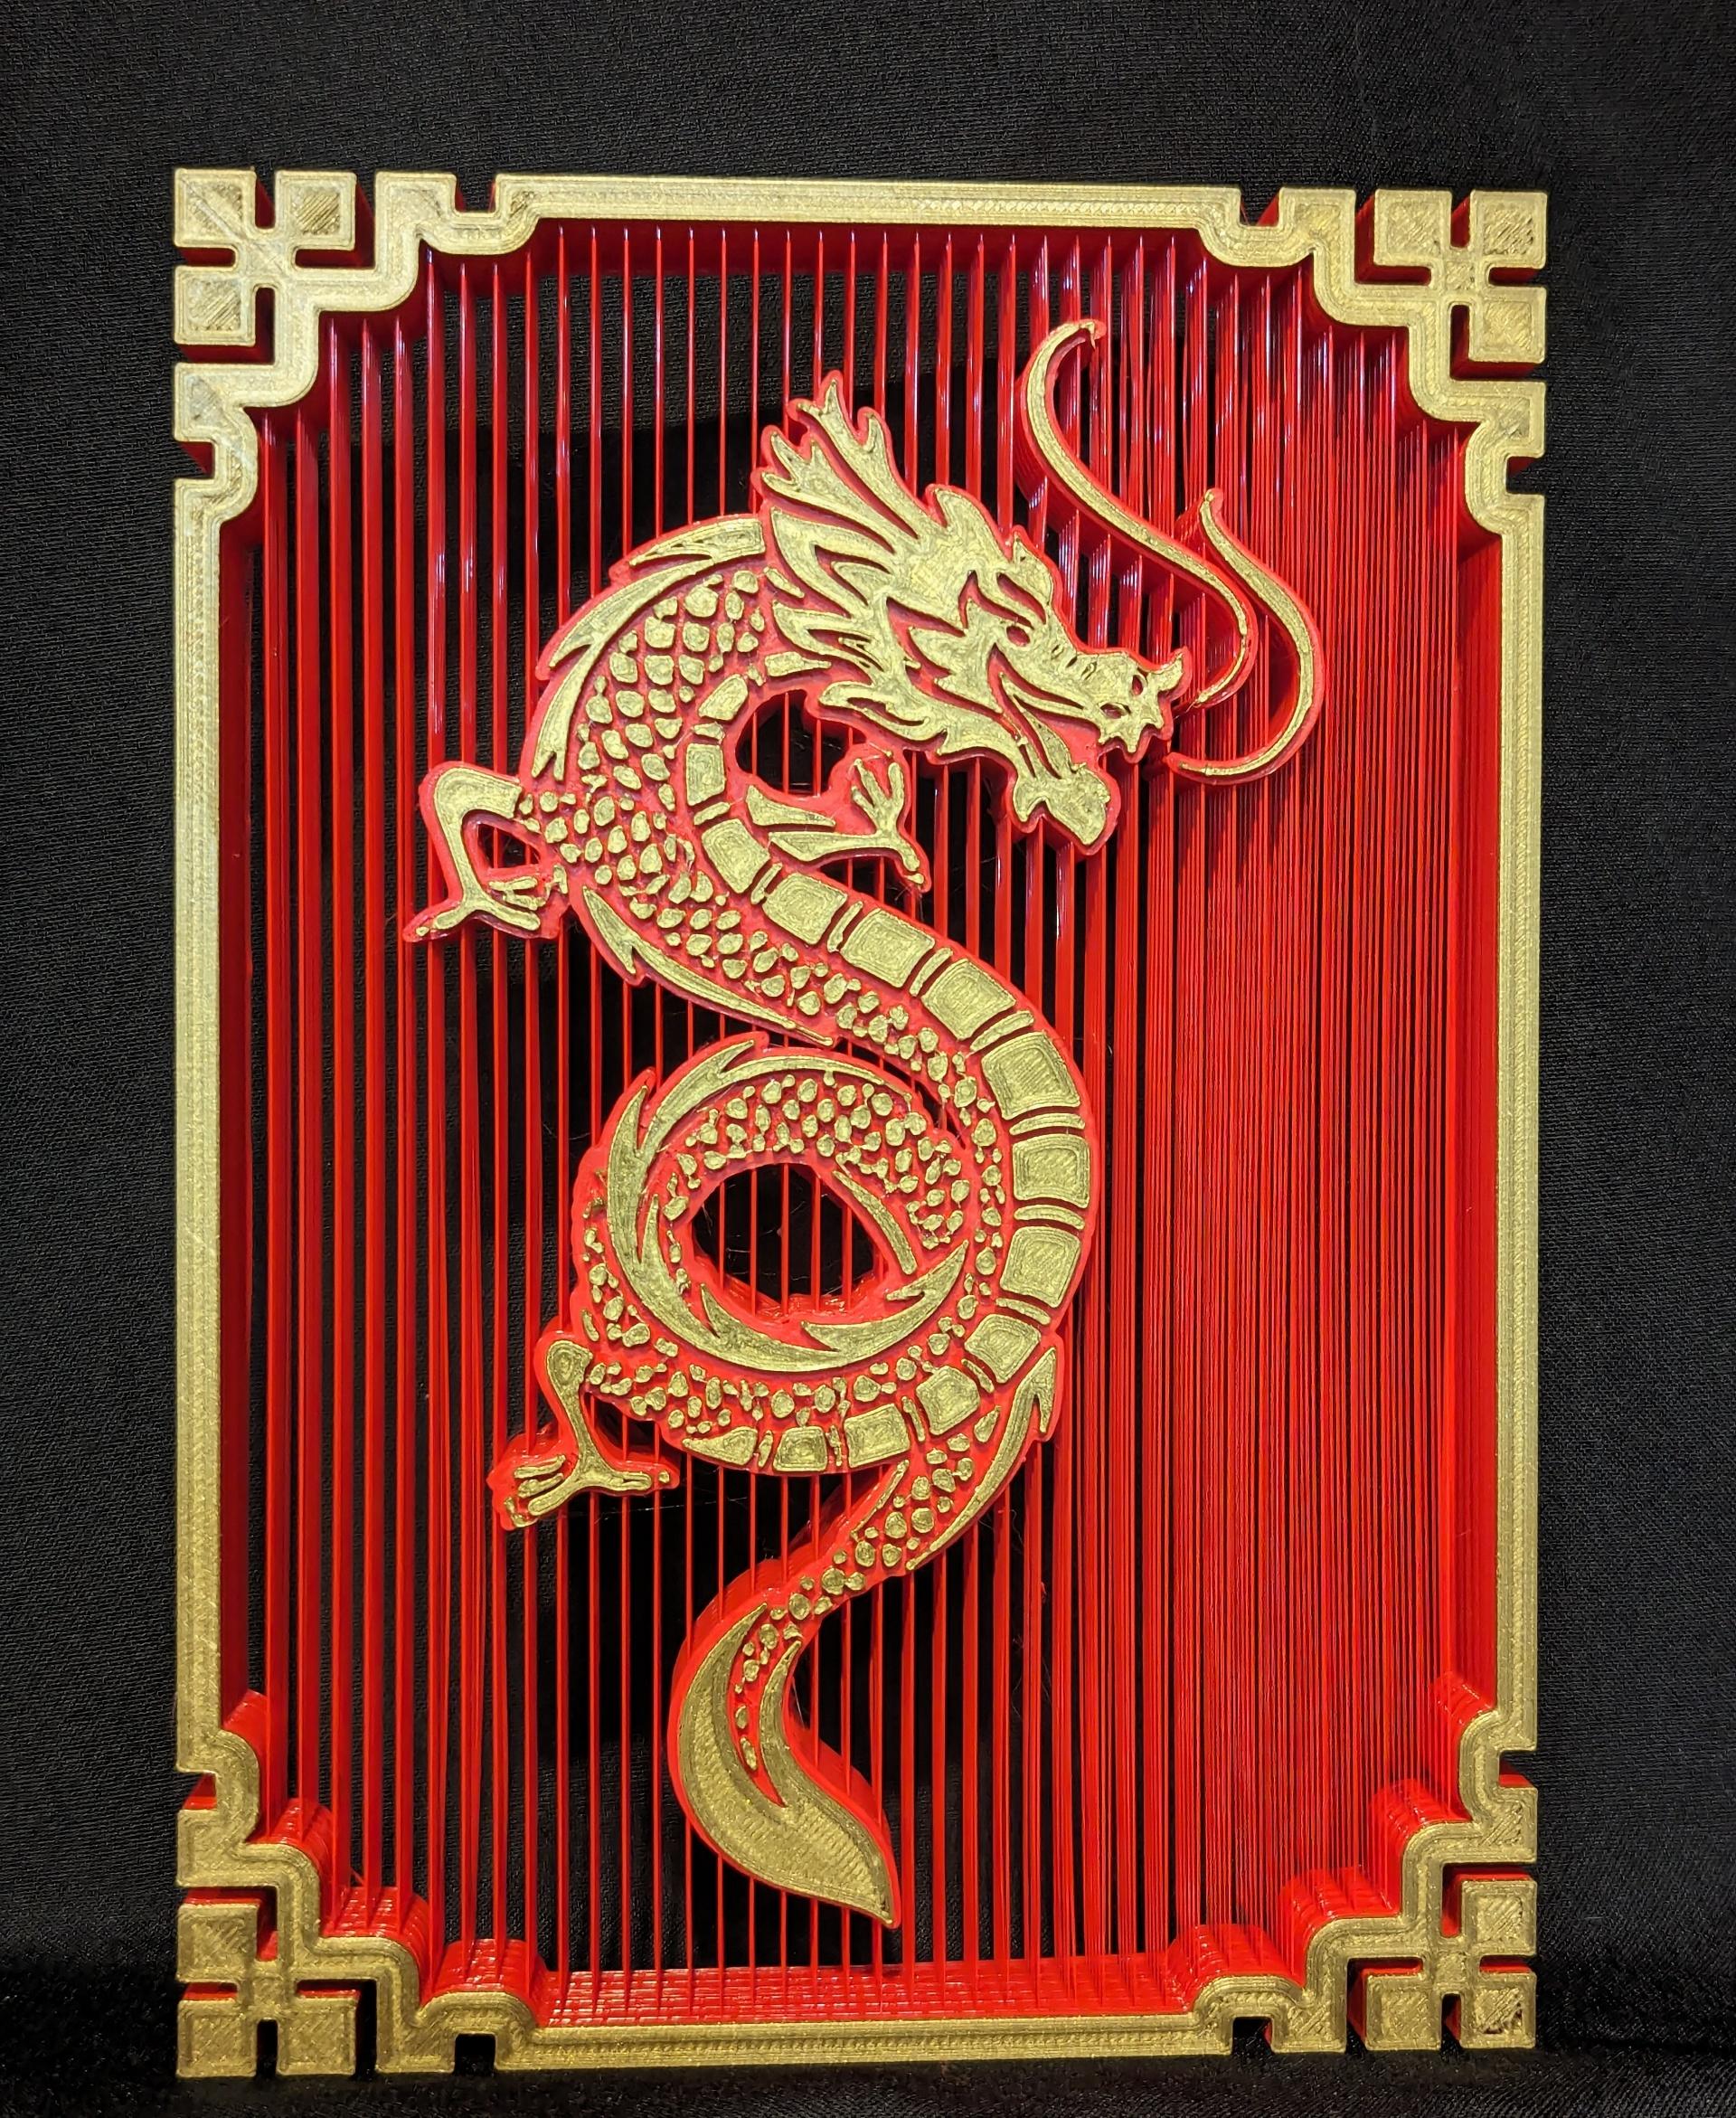 Dragon Suspended String Art - Thank you for the awesome model! Printed with bronze PLA for the top 3 layers. - 3d model